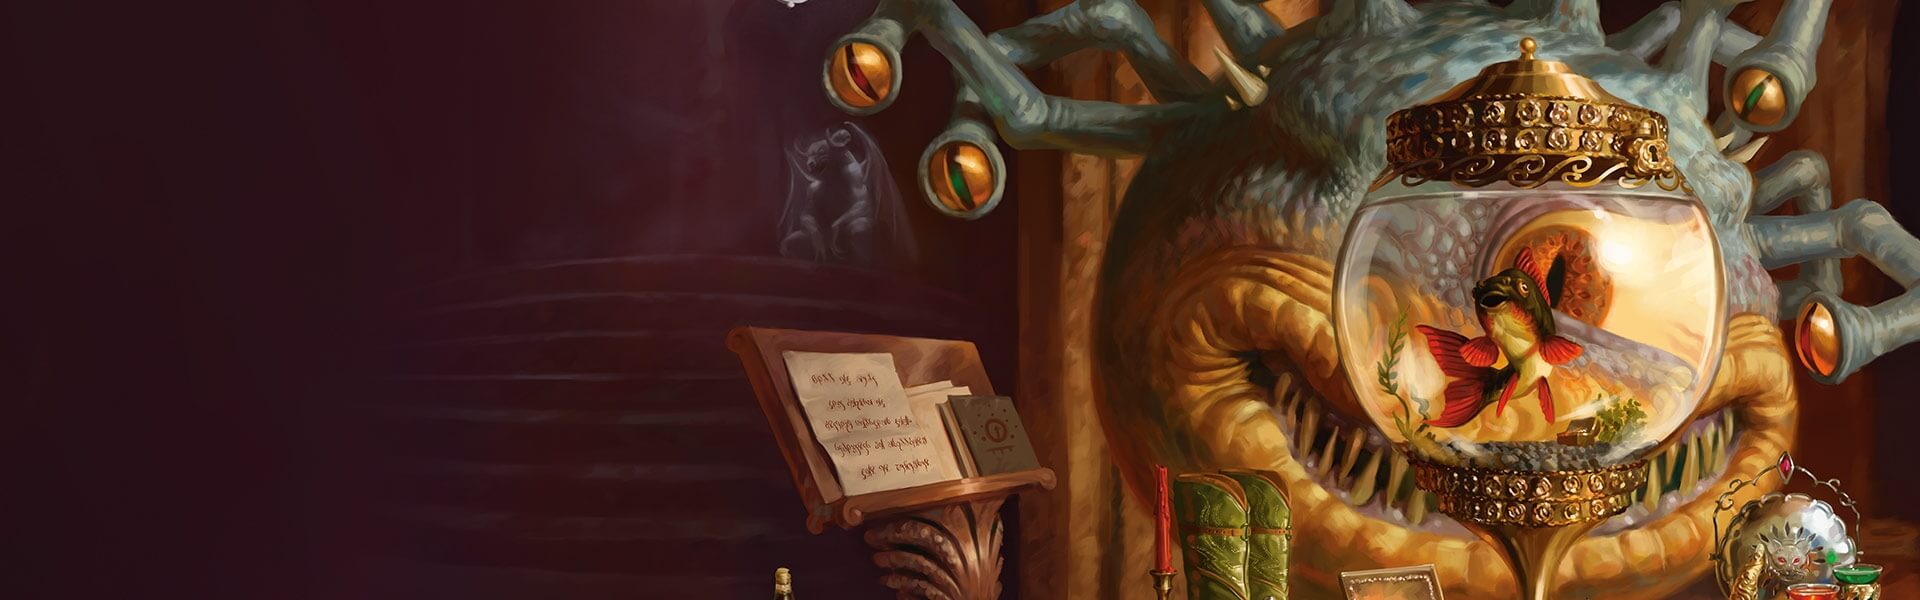 xanathar's guide to everything